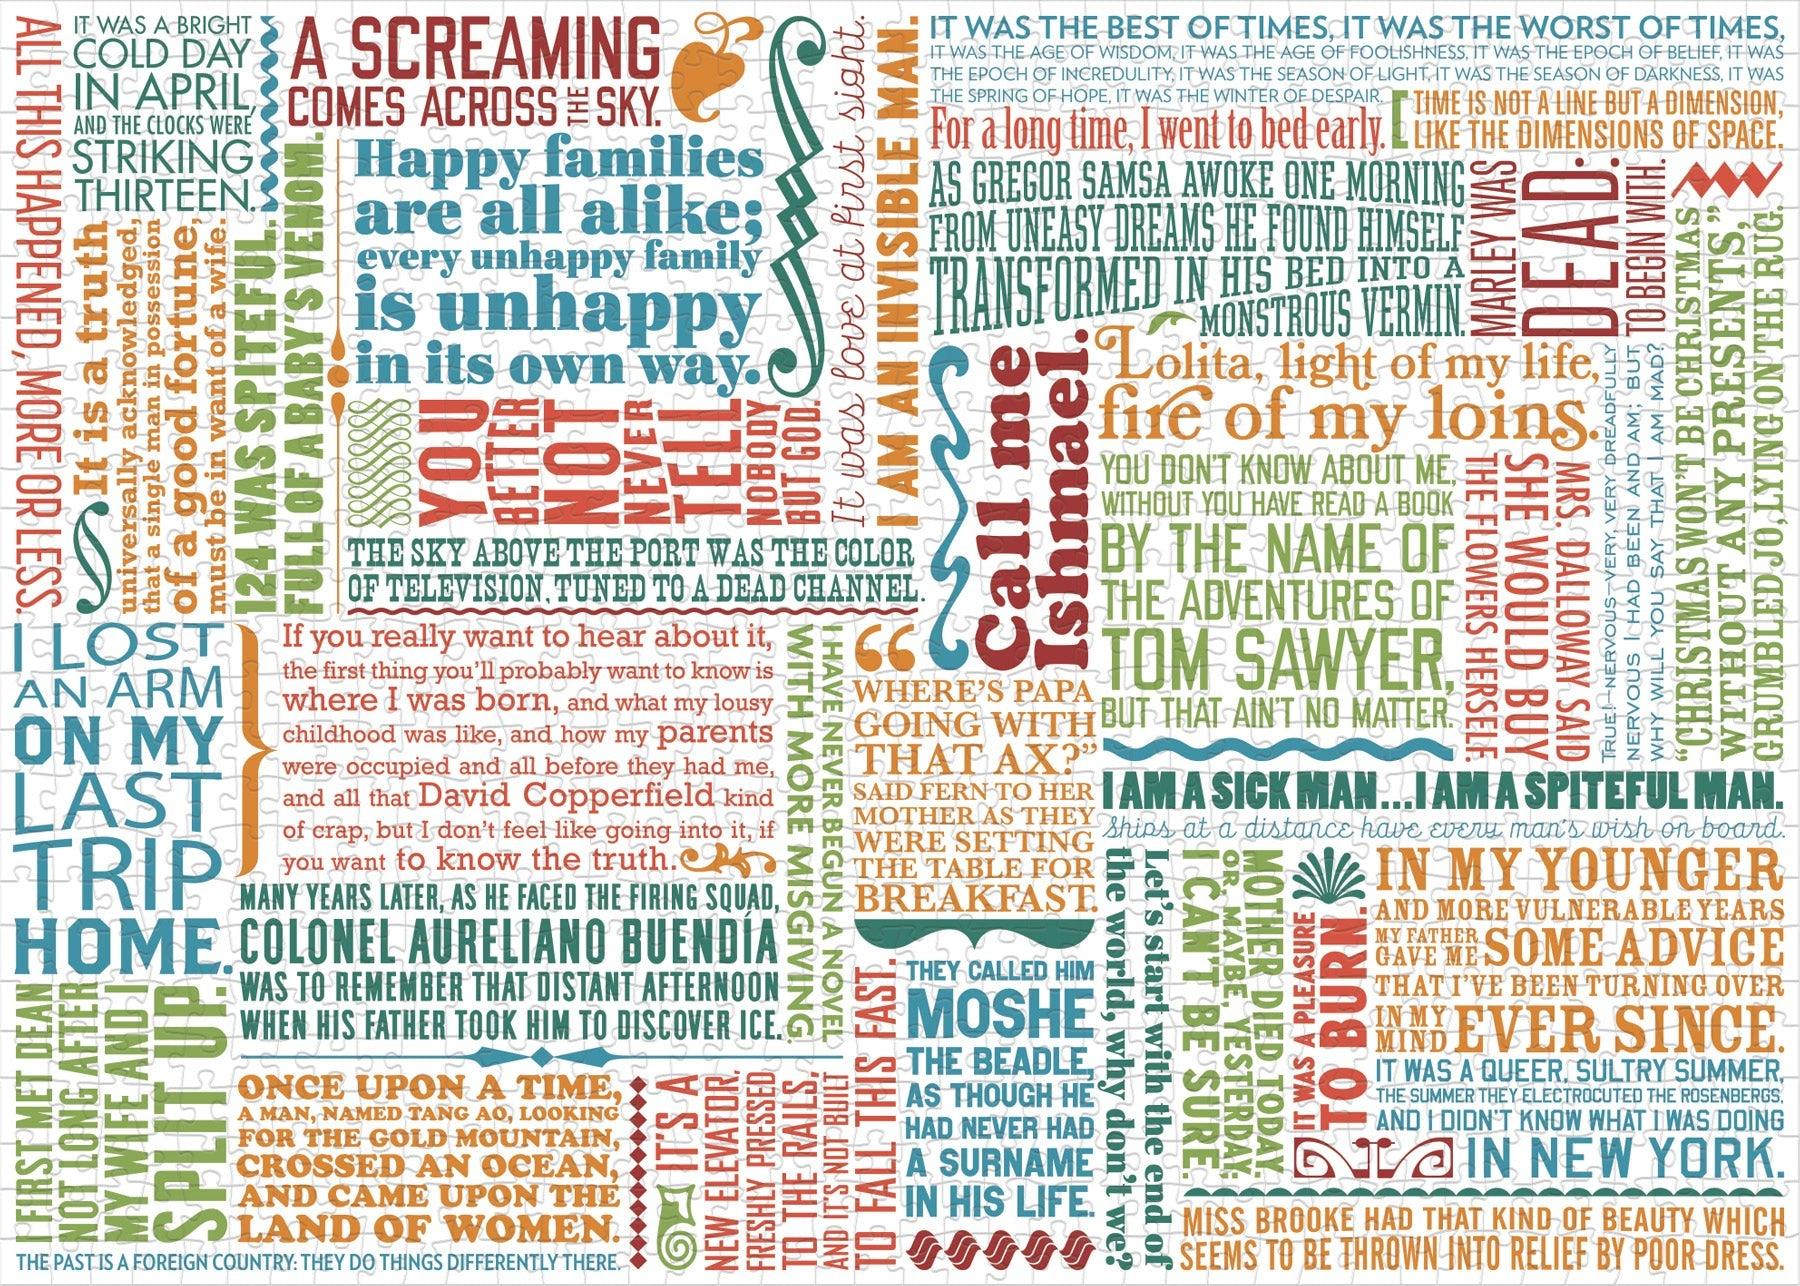 First Lines of Literature Puzzle: 1000 Pieces of Classic Book Beginnings (90% Recycled Paper)